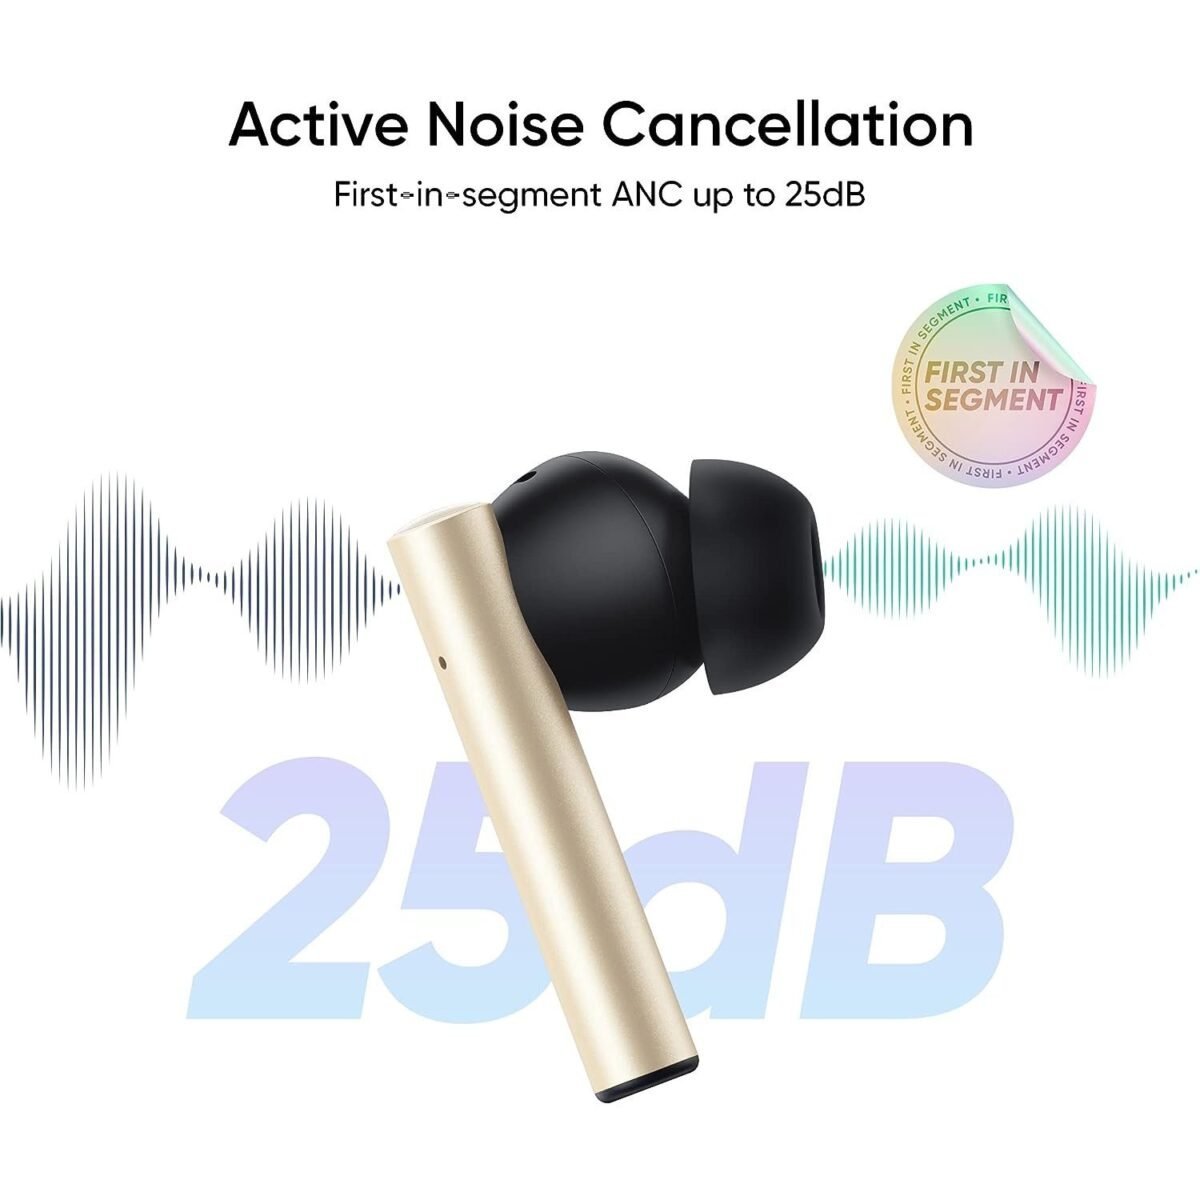 Realme Buds Air 2 True Wireless in Ear Earbuds with Active Noise Cancellation (ANC), Super Low Latency Gaming Mode, Smart Wear